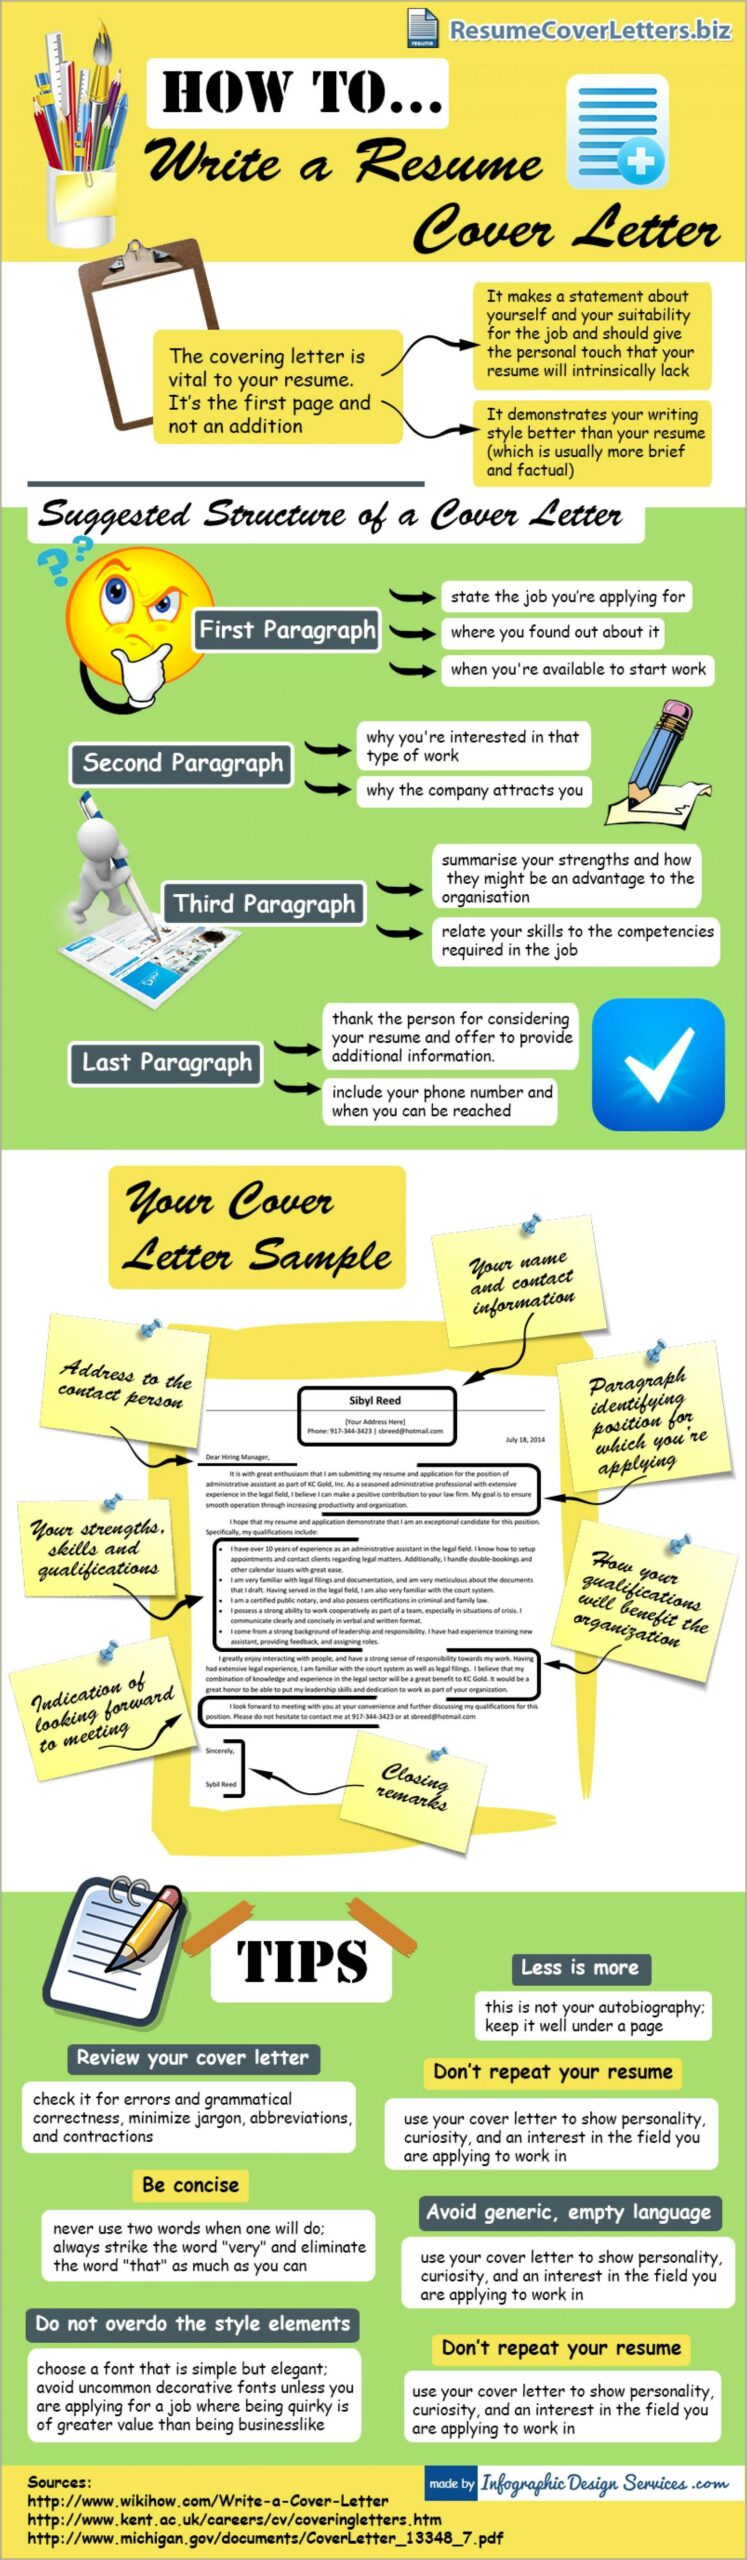 Proper Way To Write A Resume Cover Letter